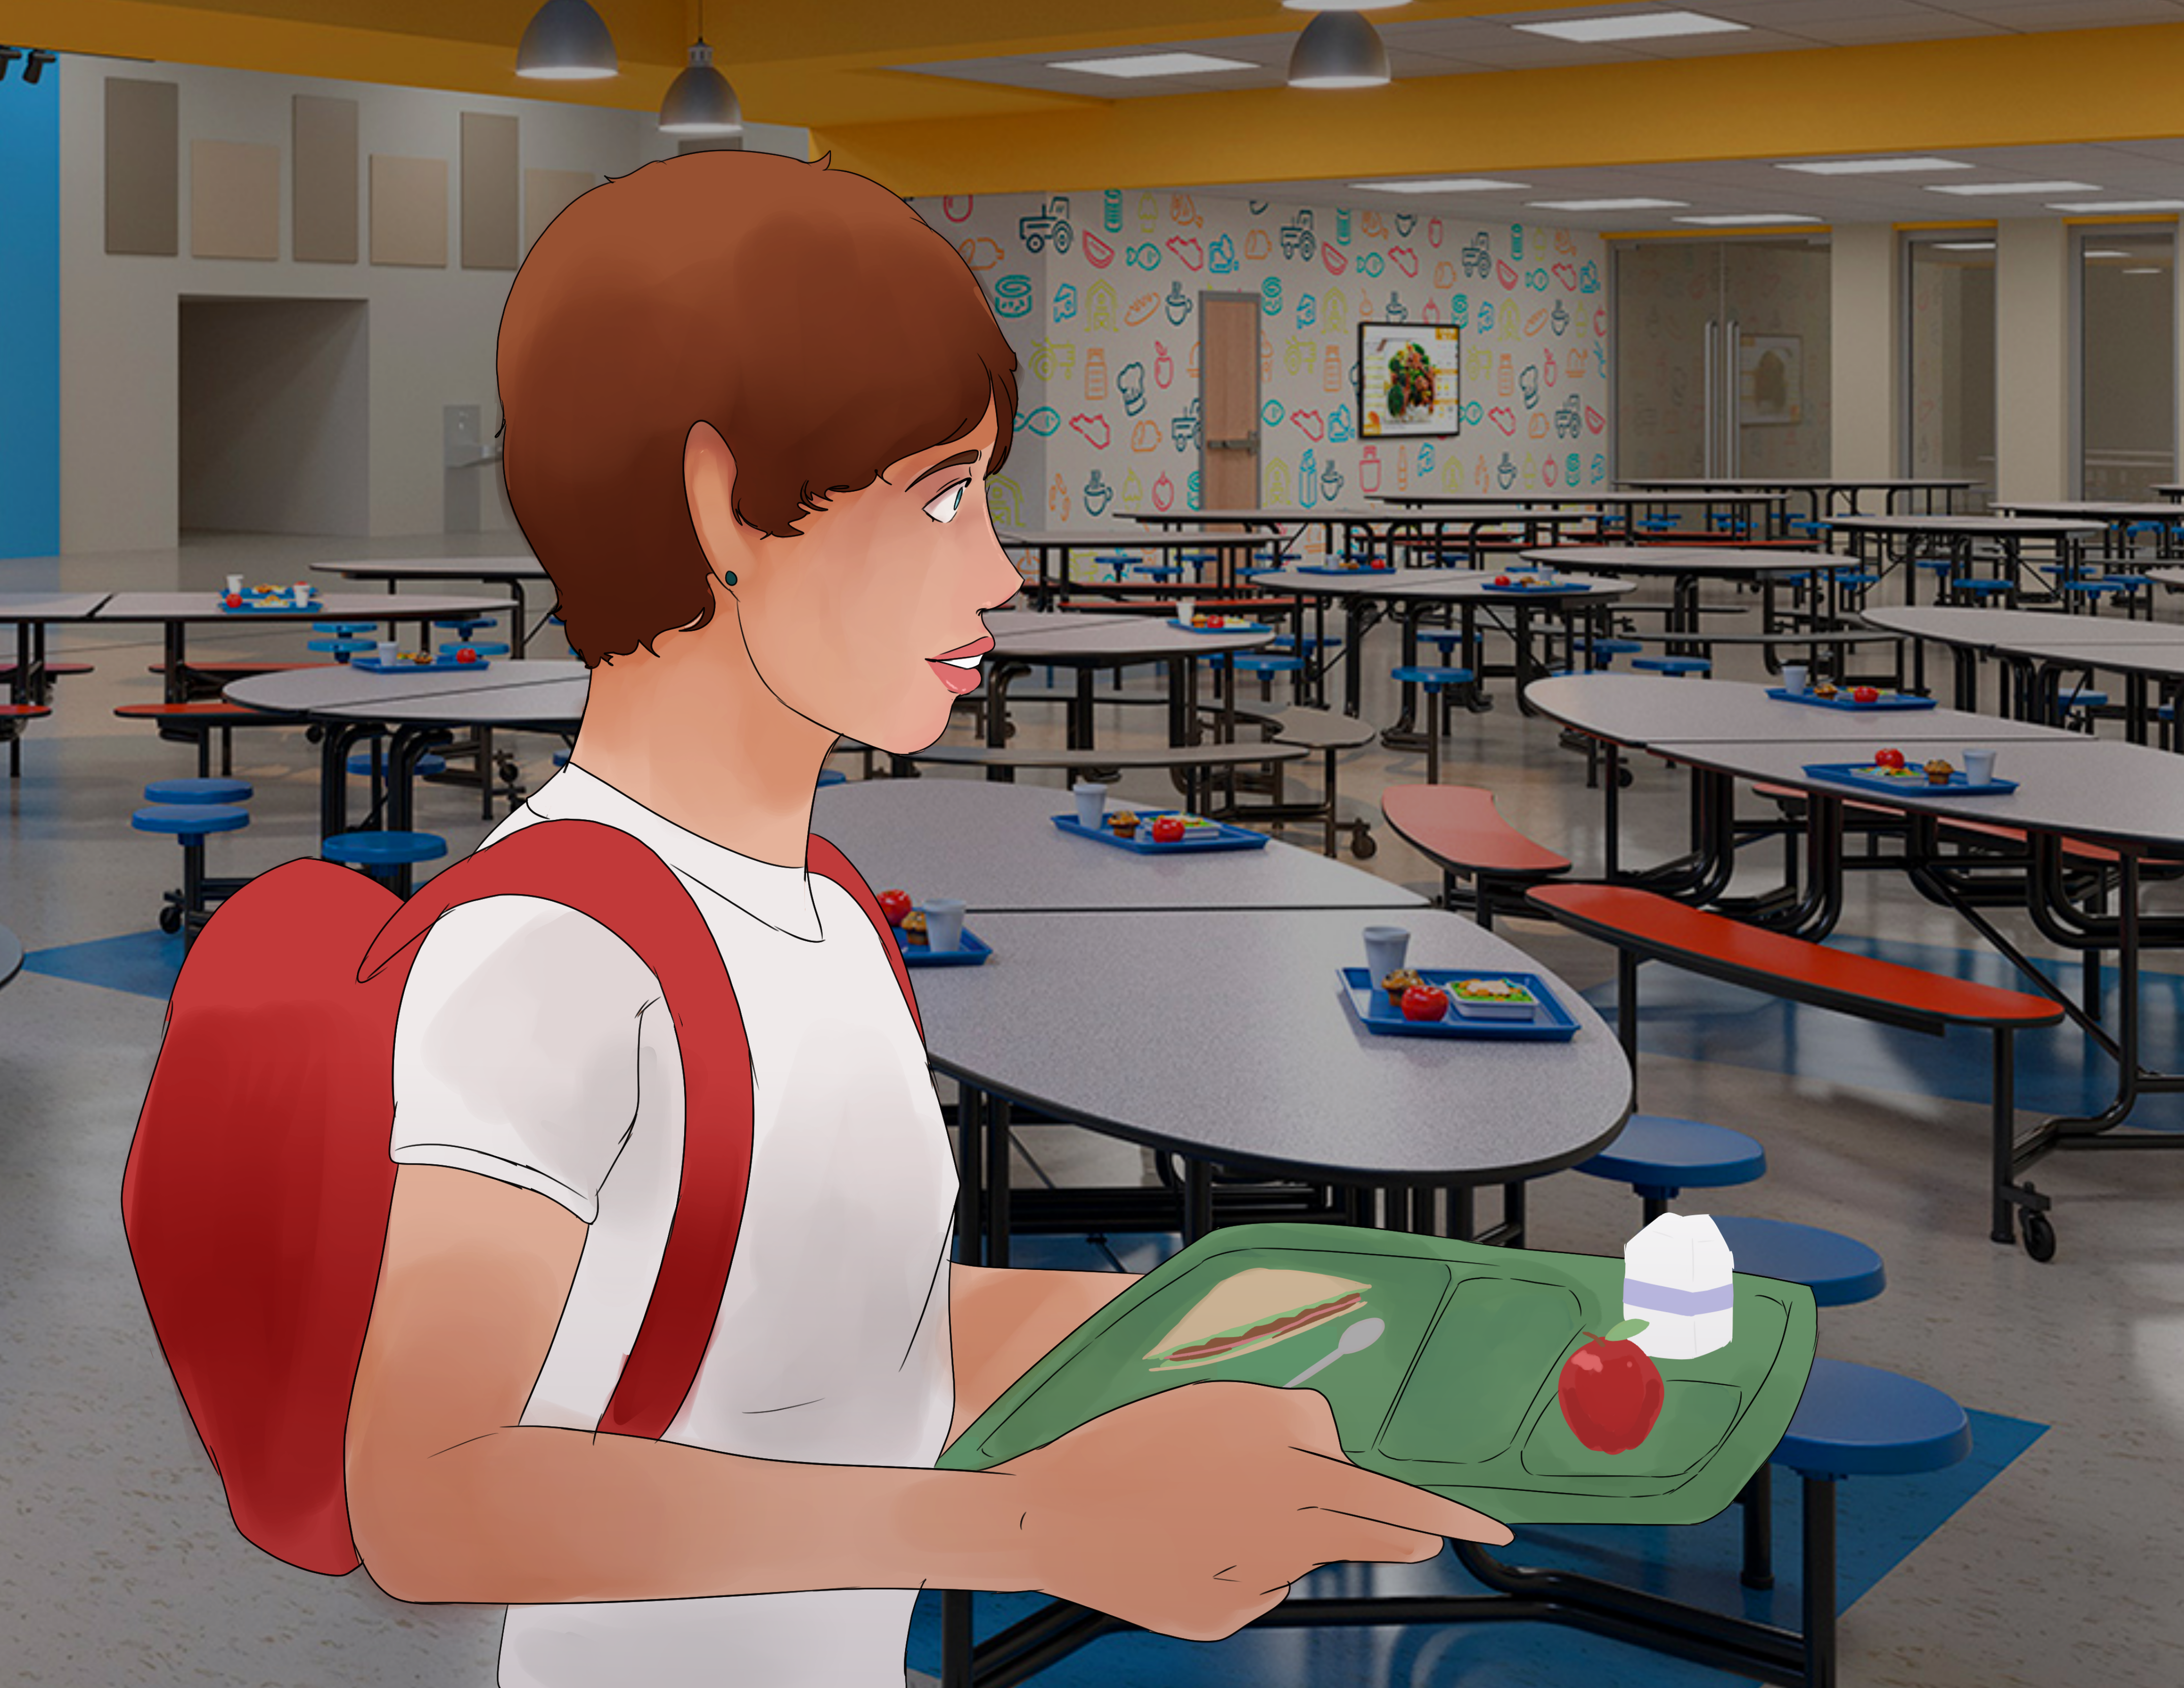 Animated digital artwork of student carrying a lunch tray in a cafeteria.